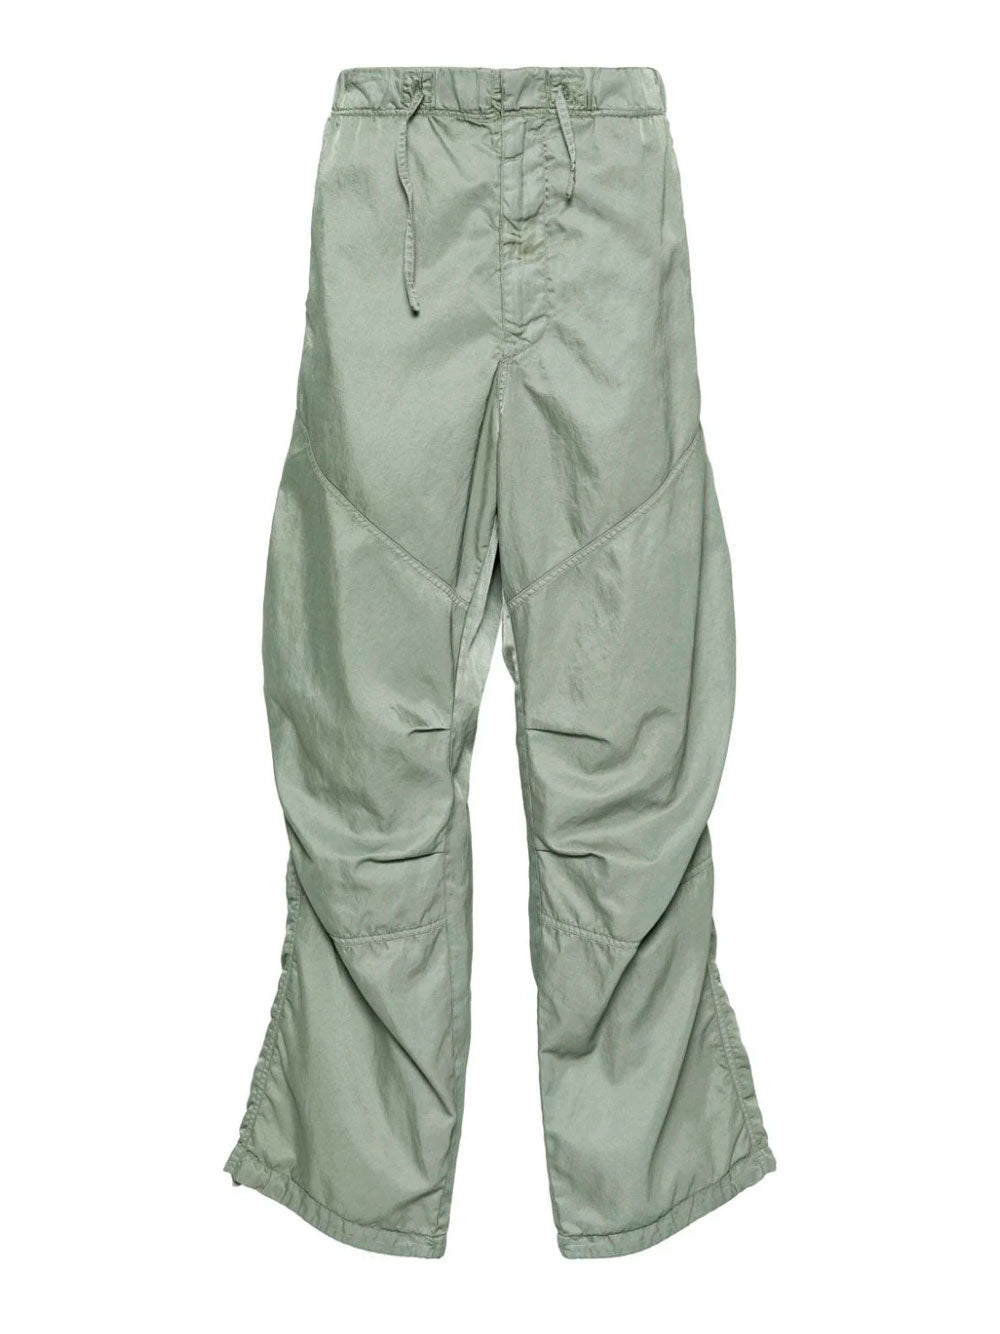 Provo trousers